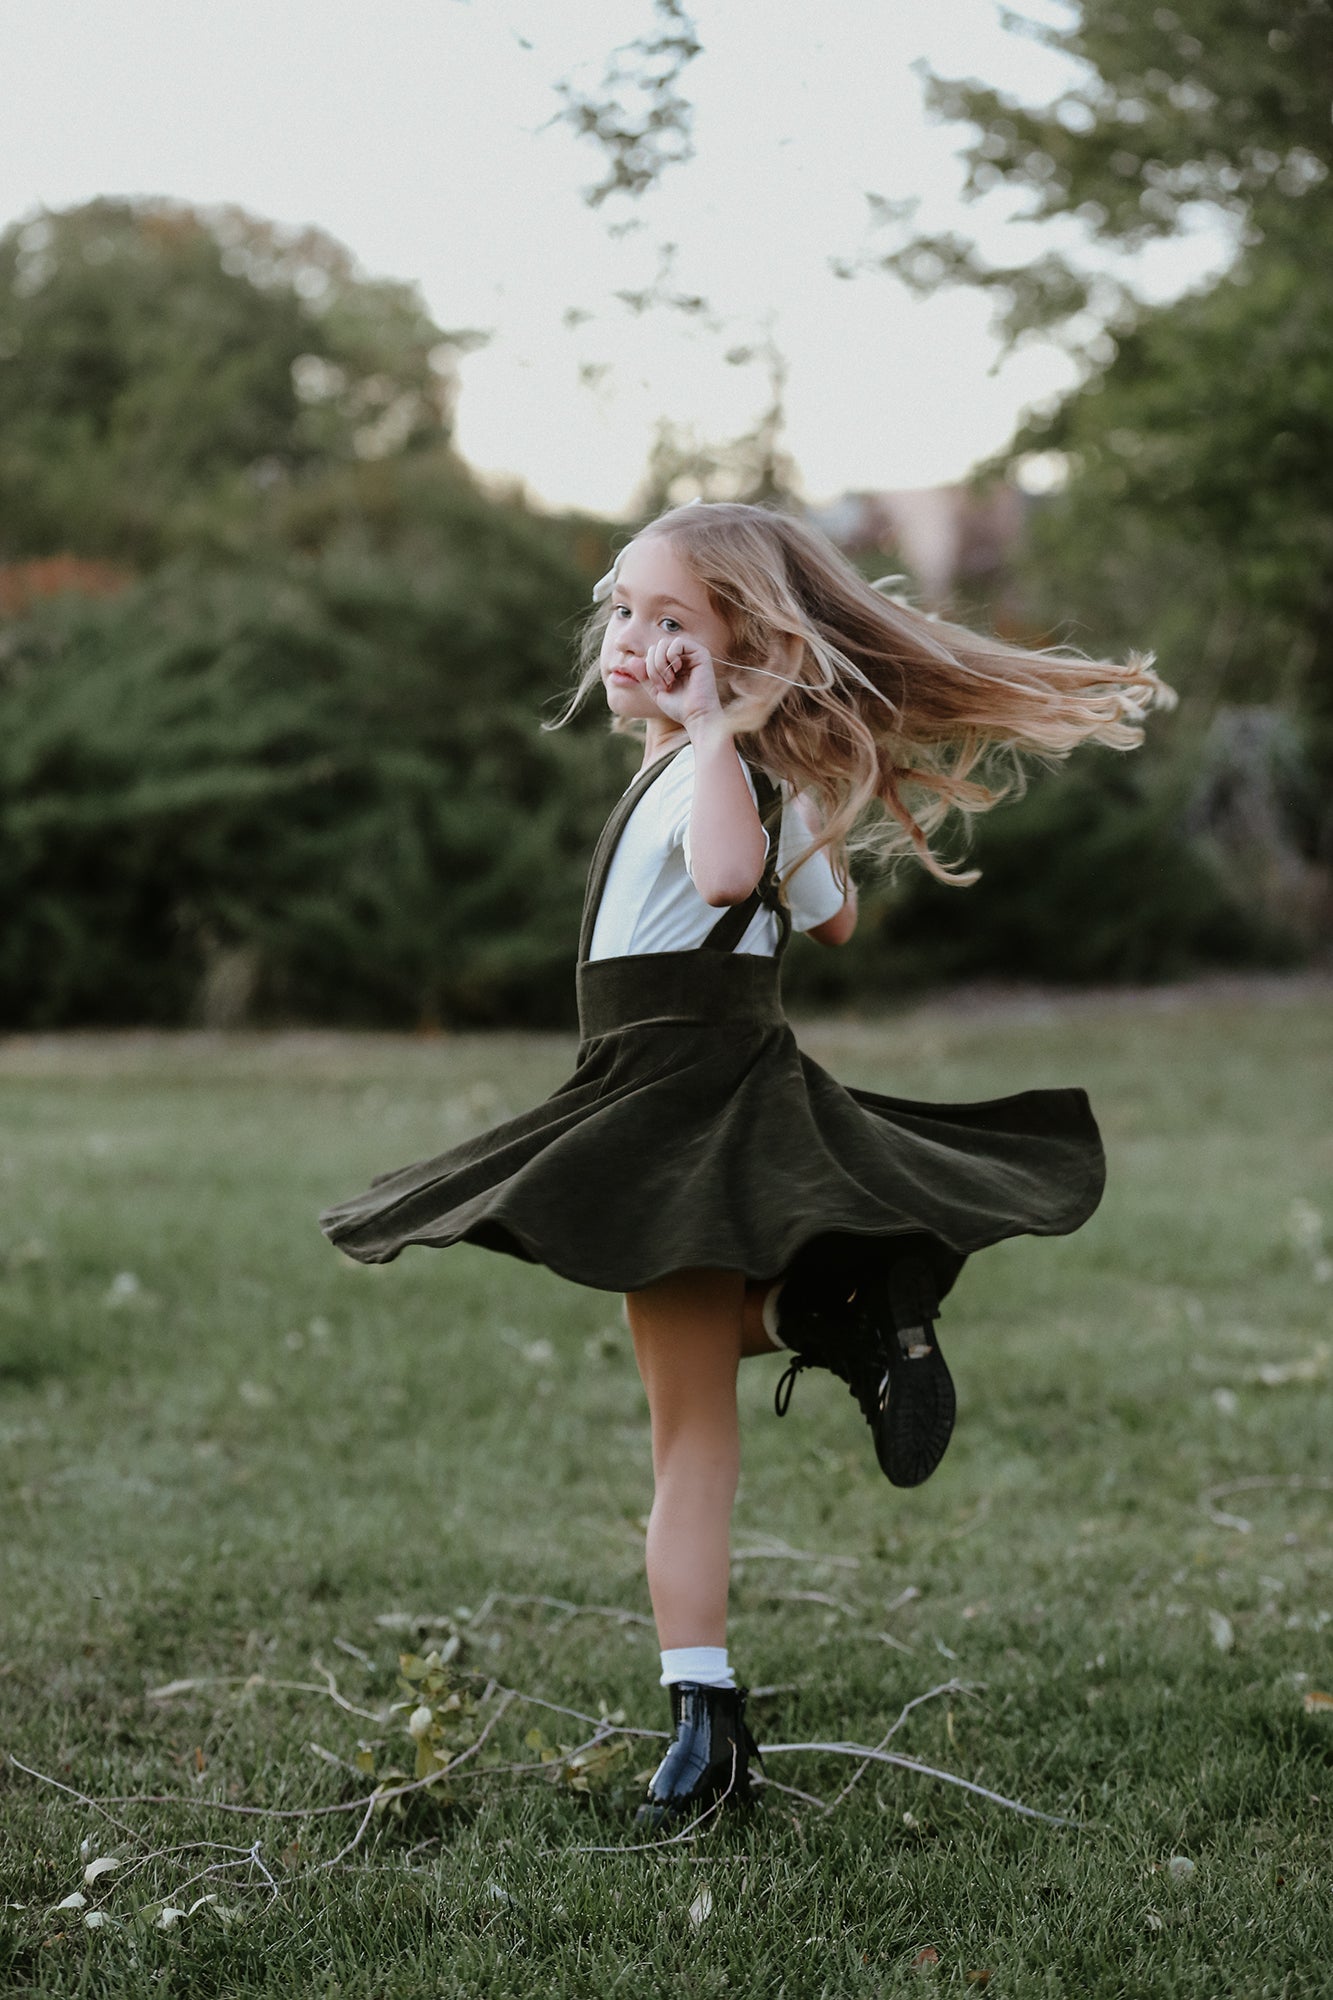 Polly Pinafore Olive Corduroy Dress